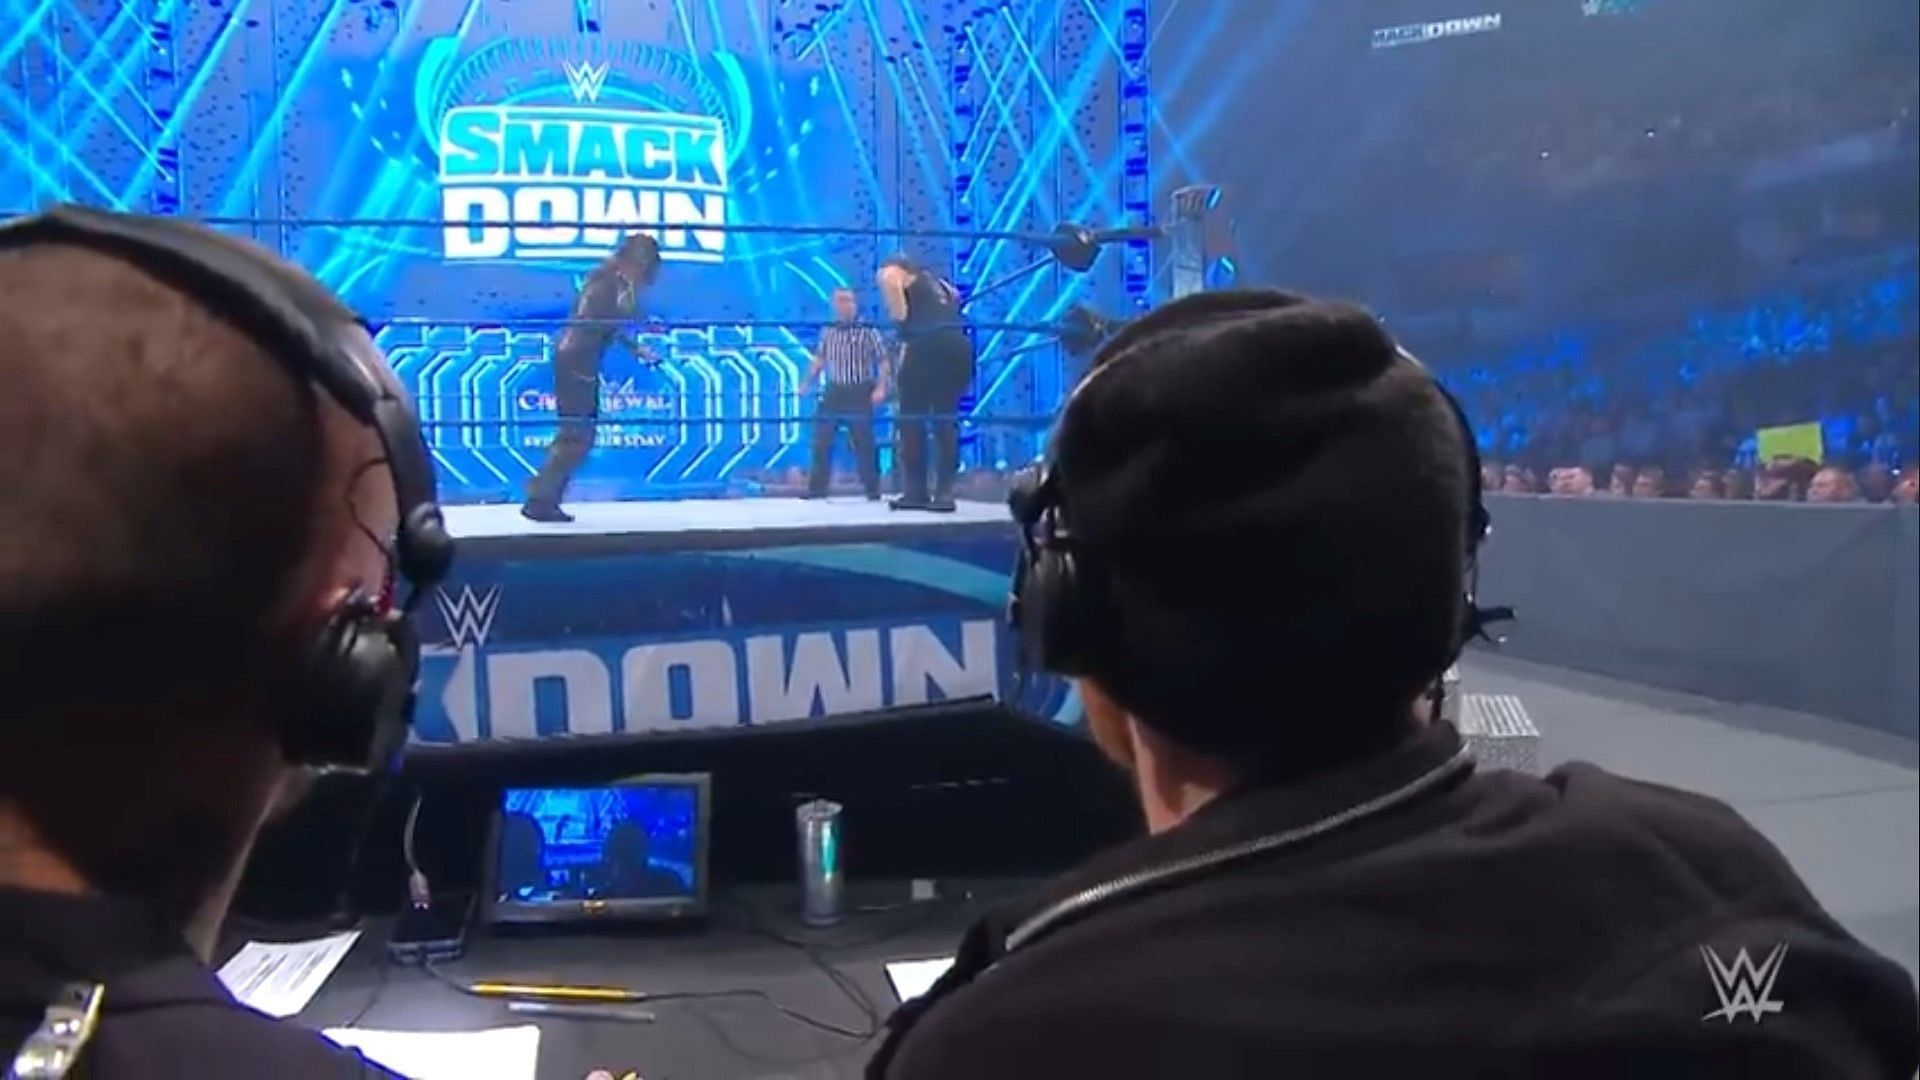 A look behind the WWE SmackDown announce table